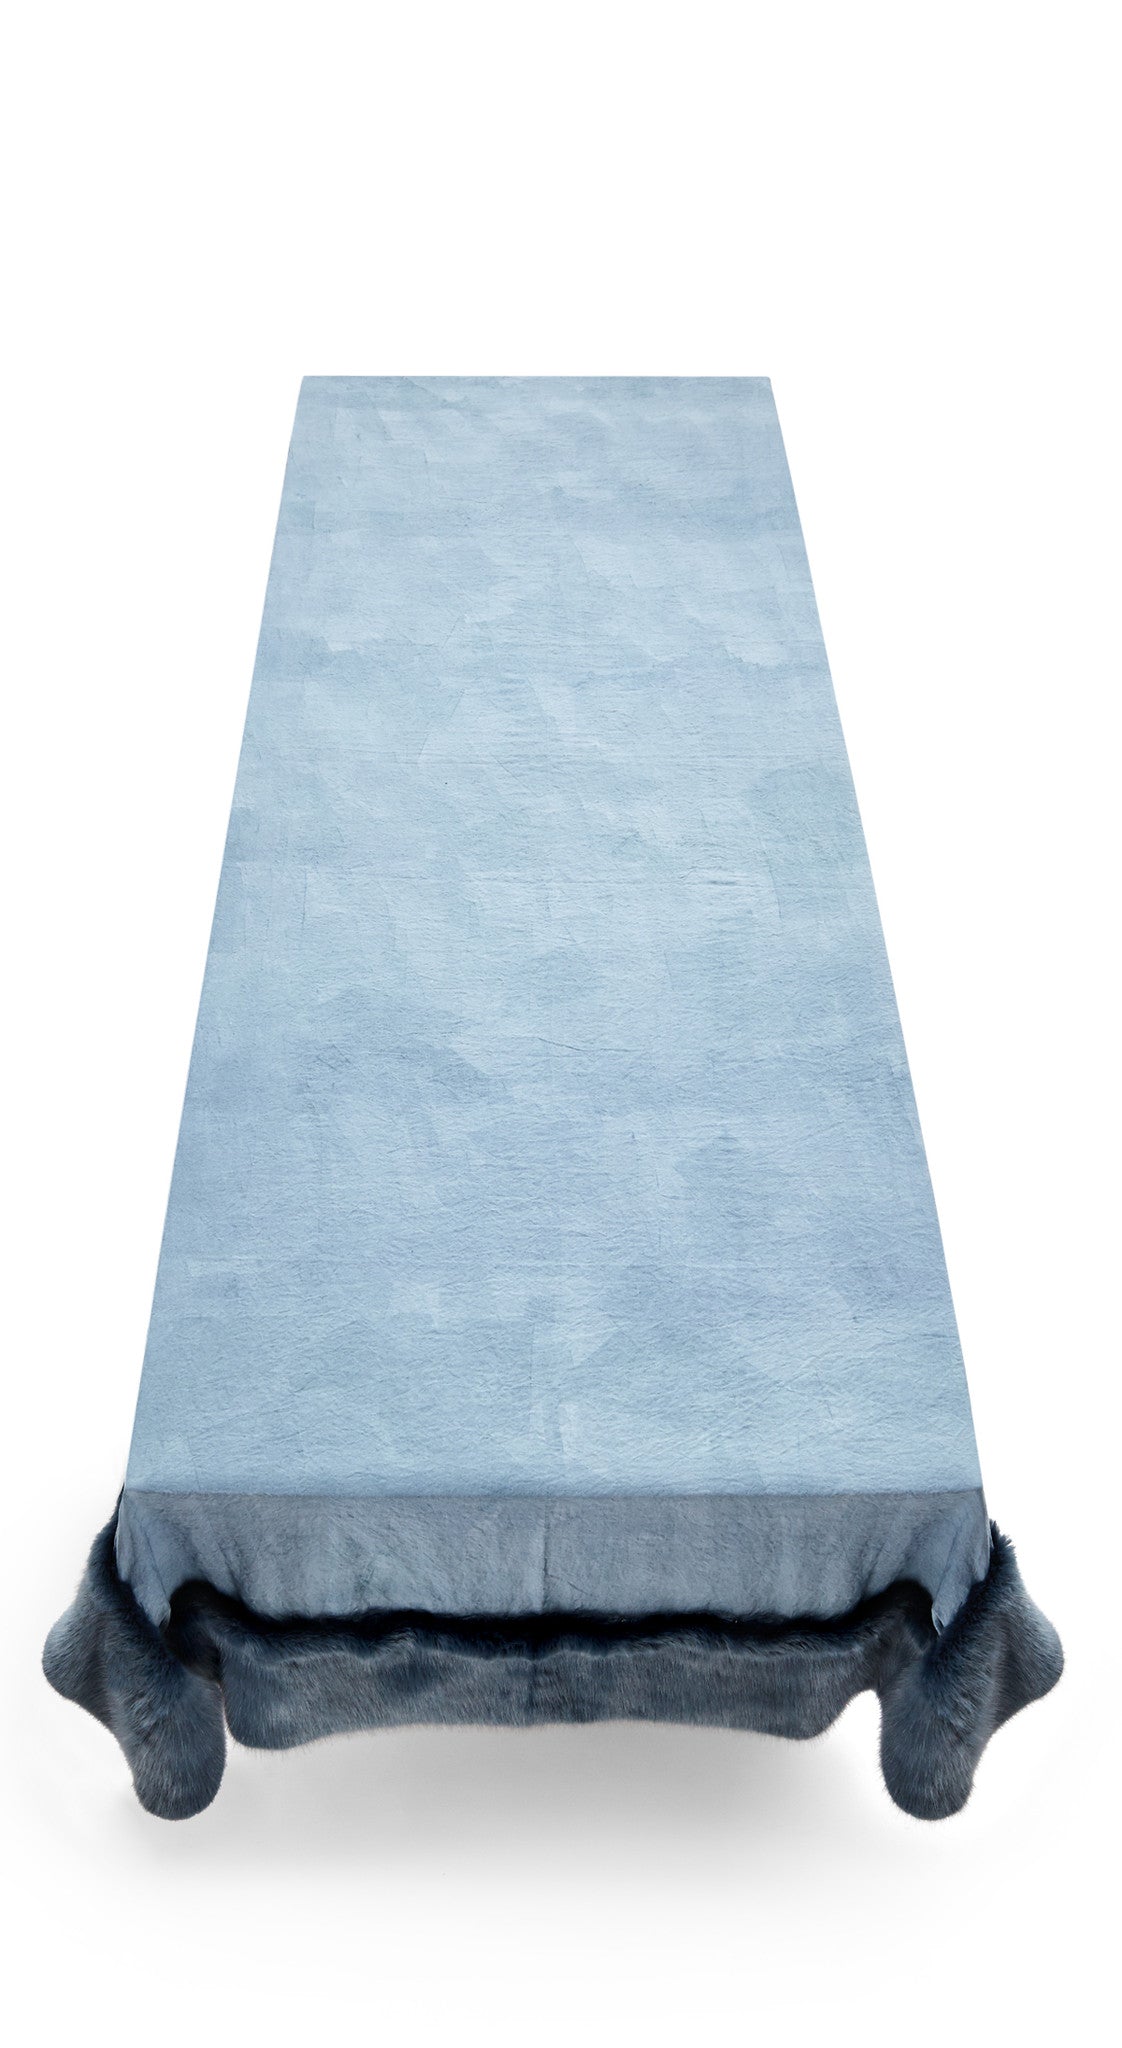 Summerill & Bishop x Shrimps Hand Painted Linen and Faux Fur Tablecloth in Powder Blue